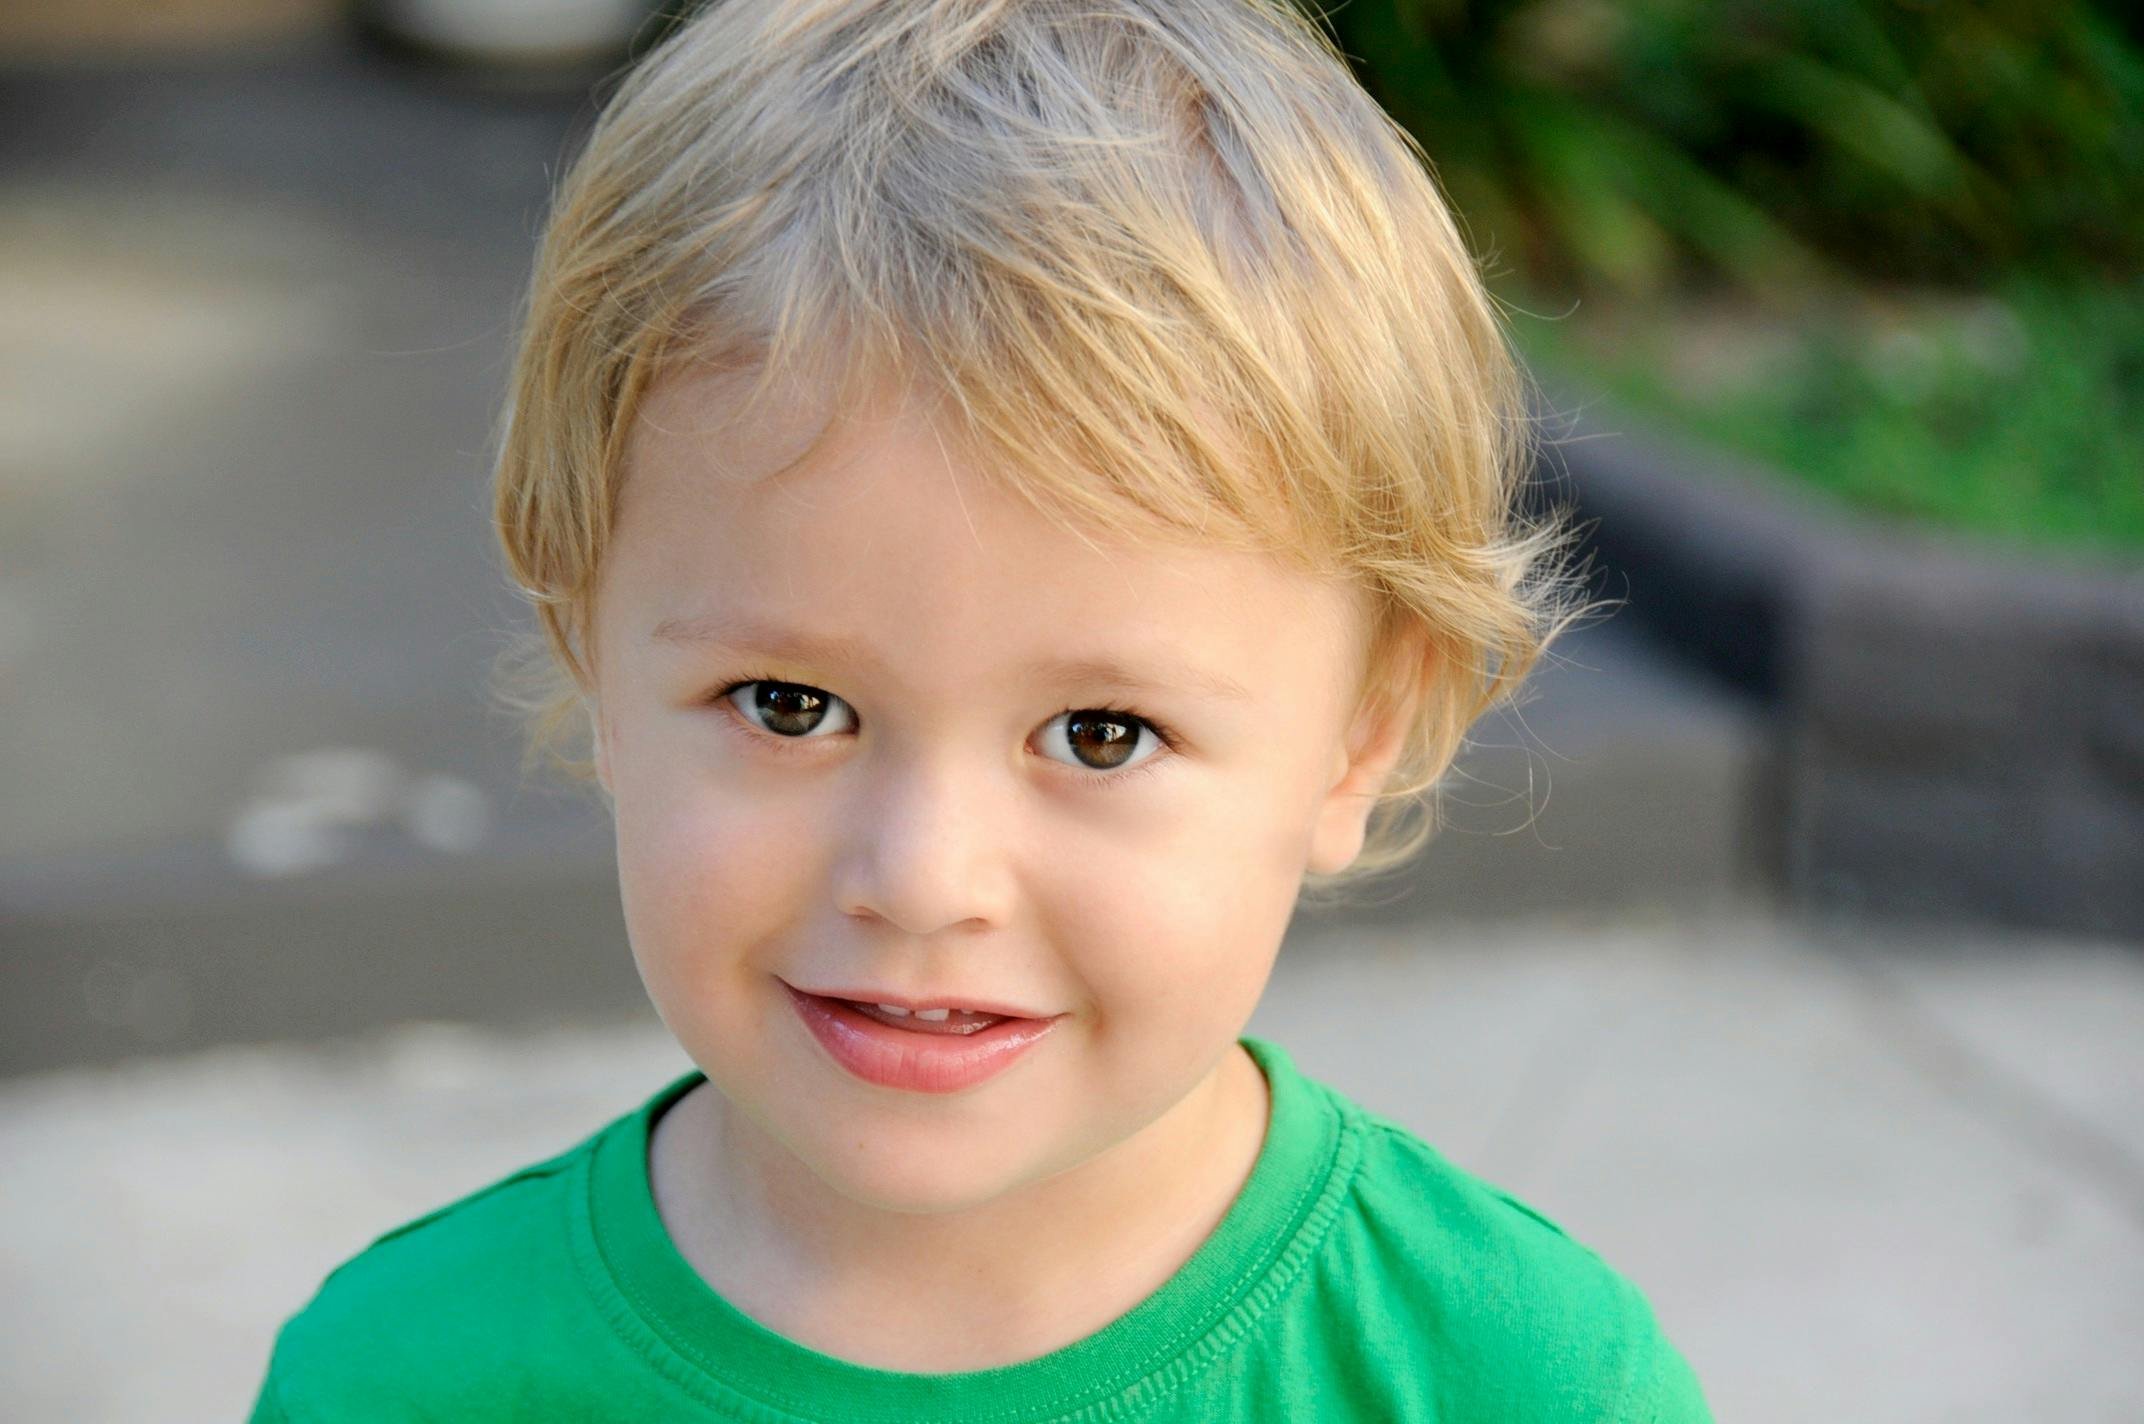 a close up of a child wearing a green shirt, blonde hair and blue eyes, small beard, photograph, young child